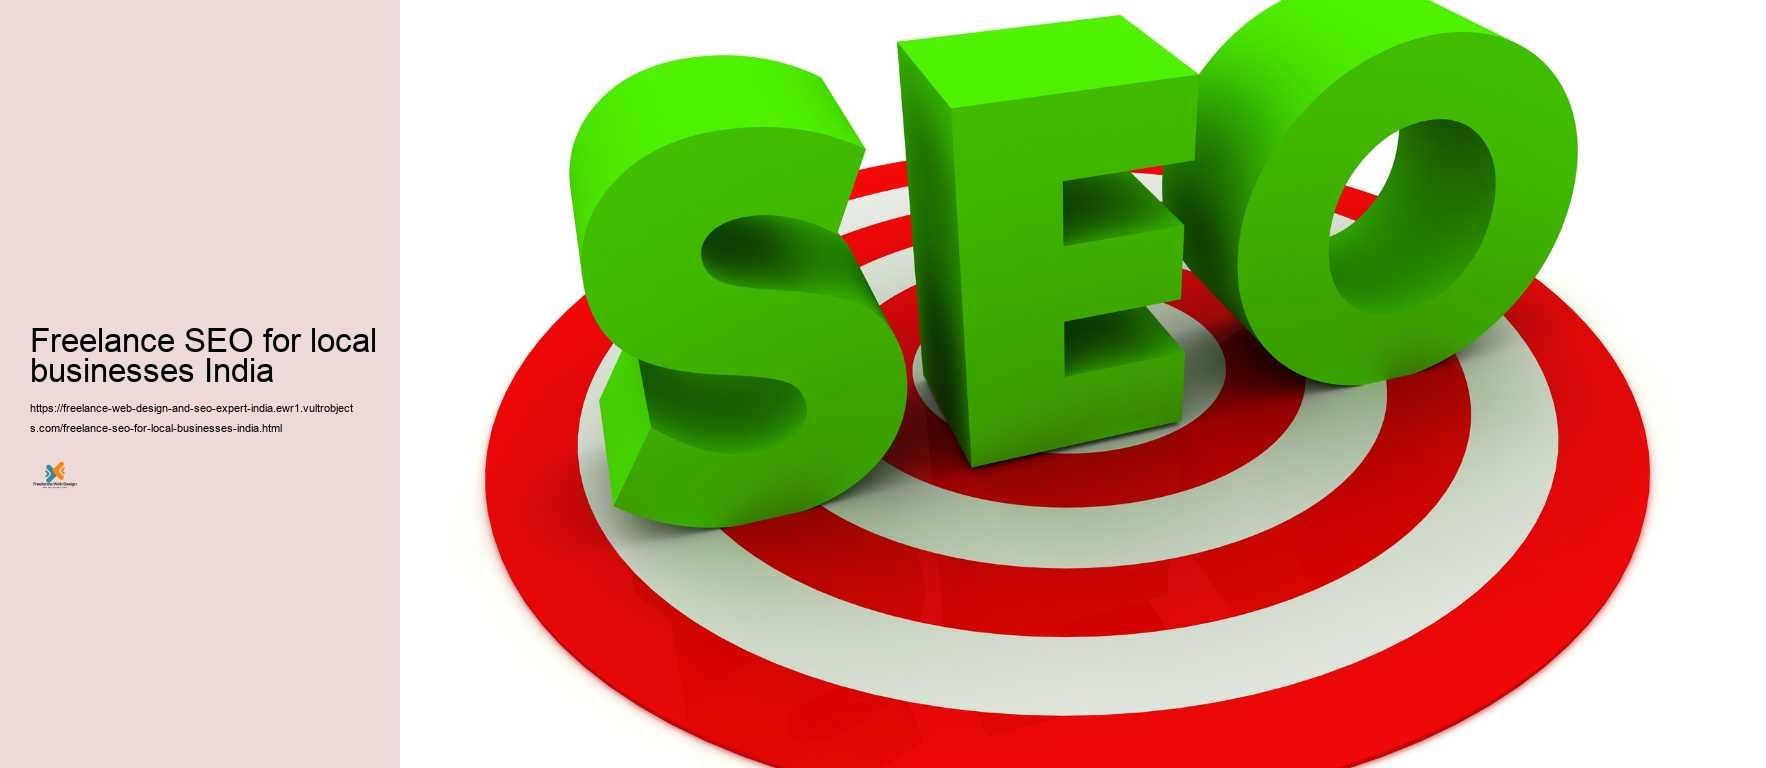 Freelance SEO for local businesses India